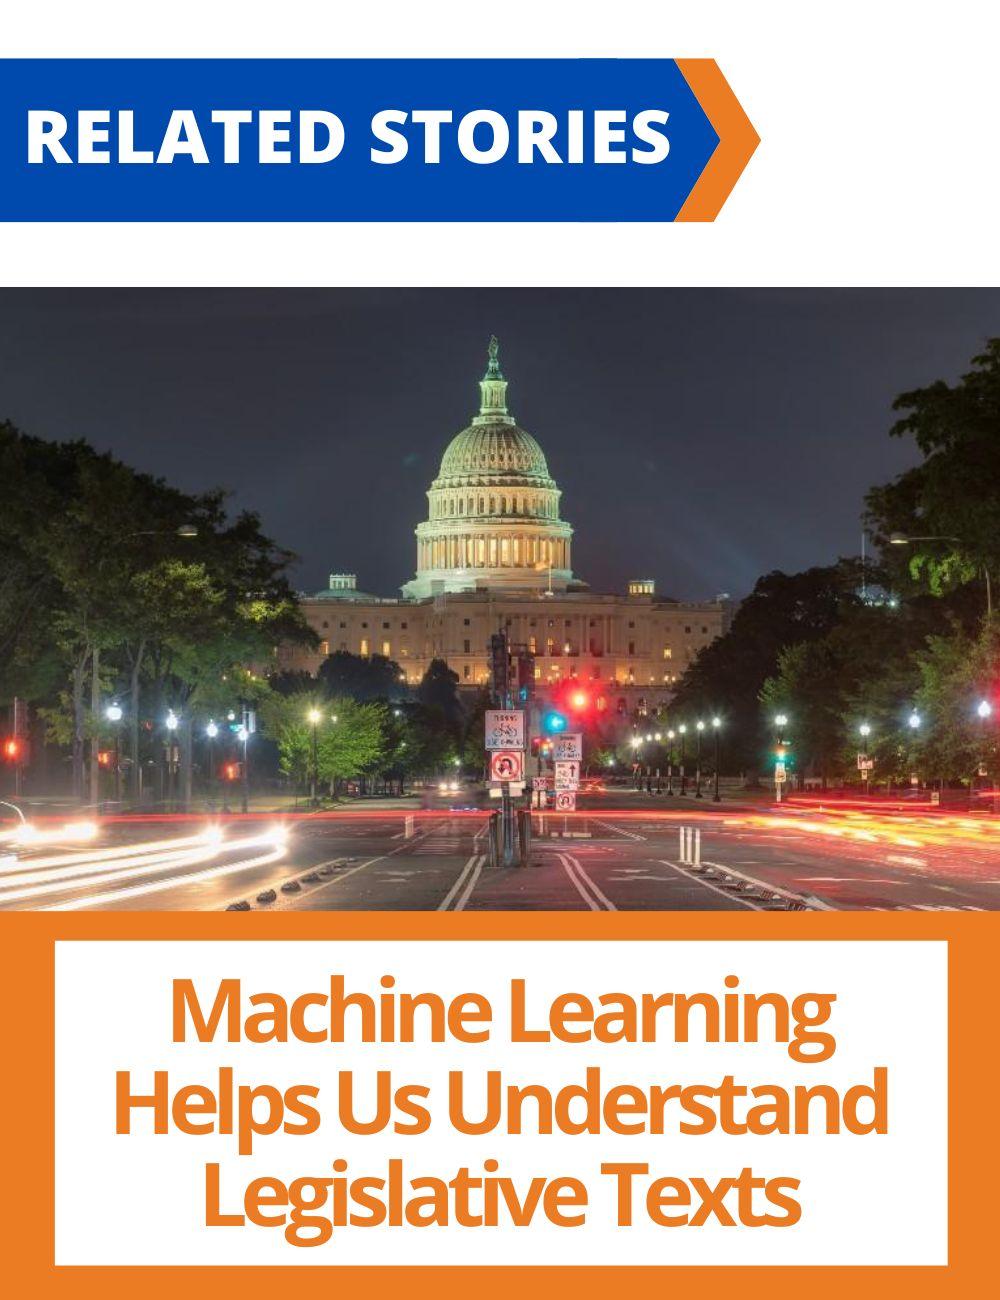 Link to related stories. Image: Capitol Building in Washington D.C.. Story headline: Machine Learning Helps Us Understand Legislative Texts